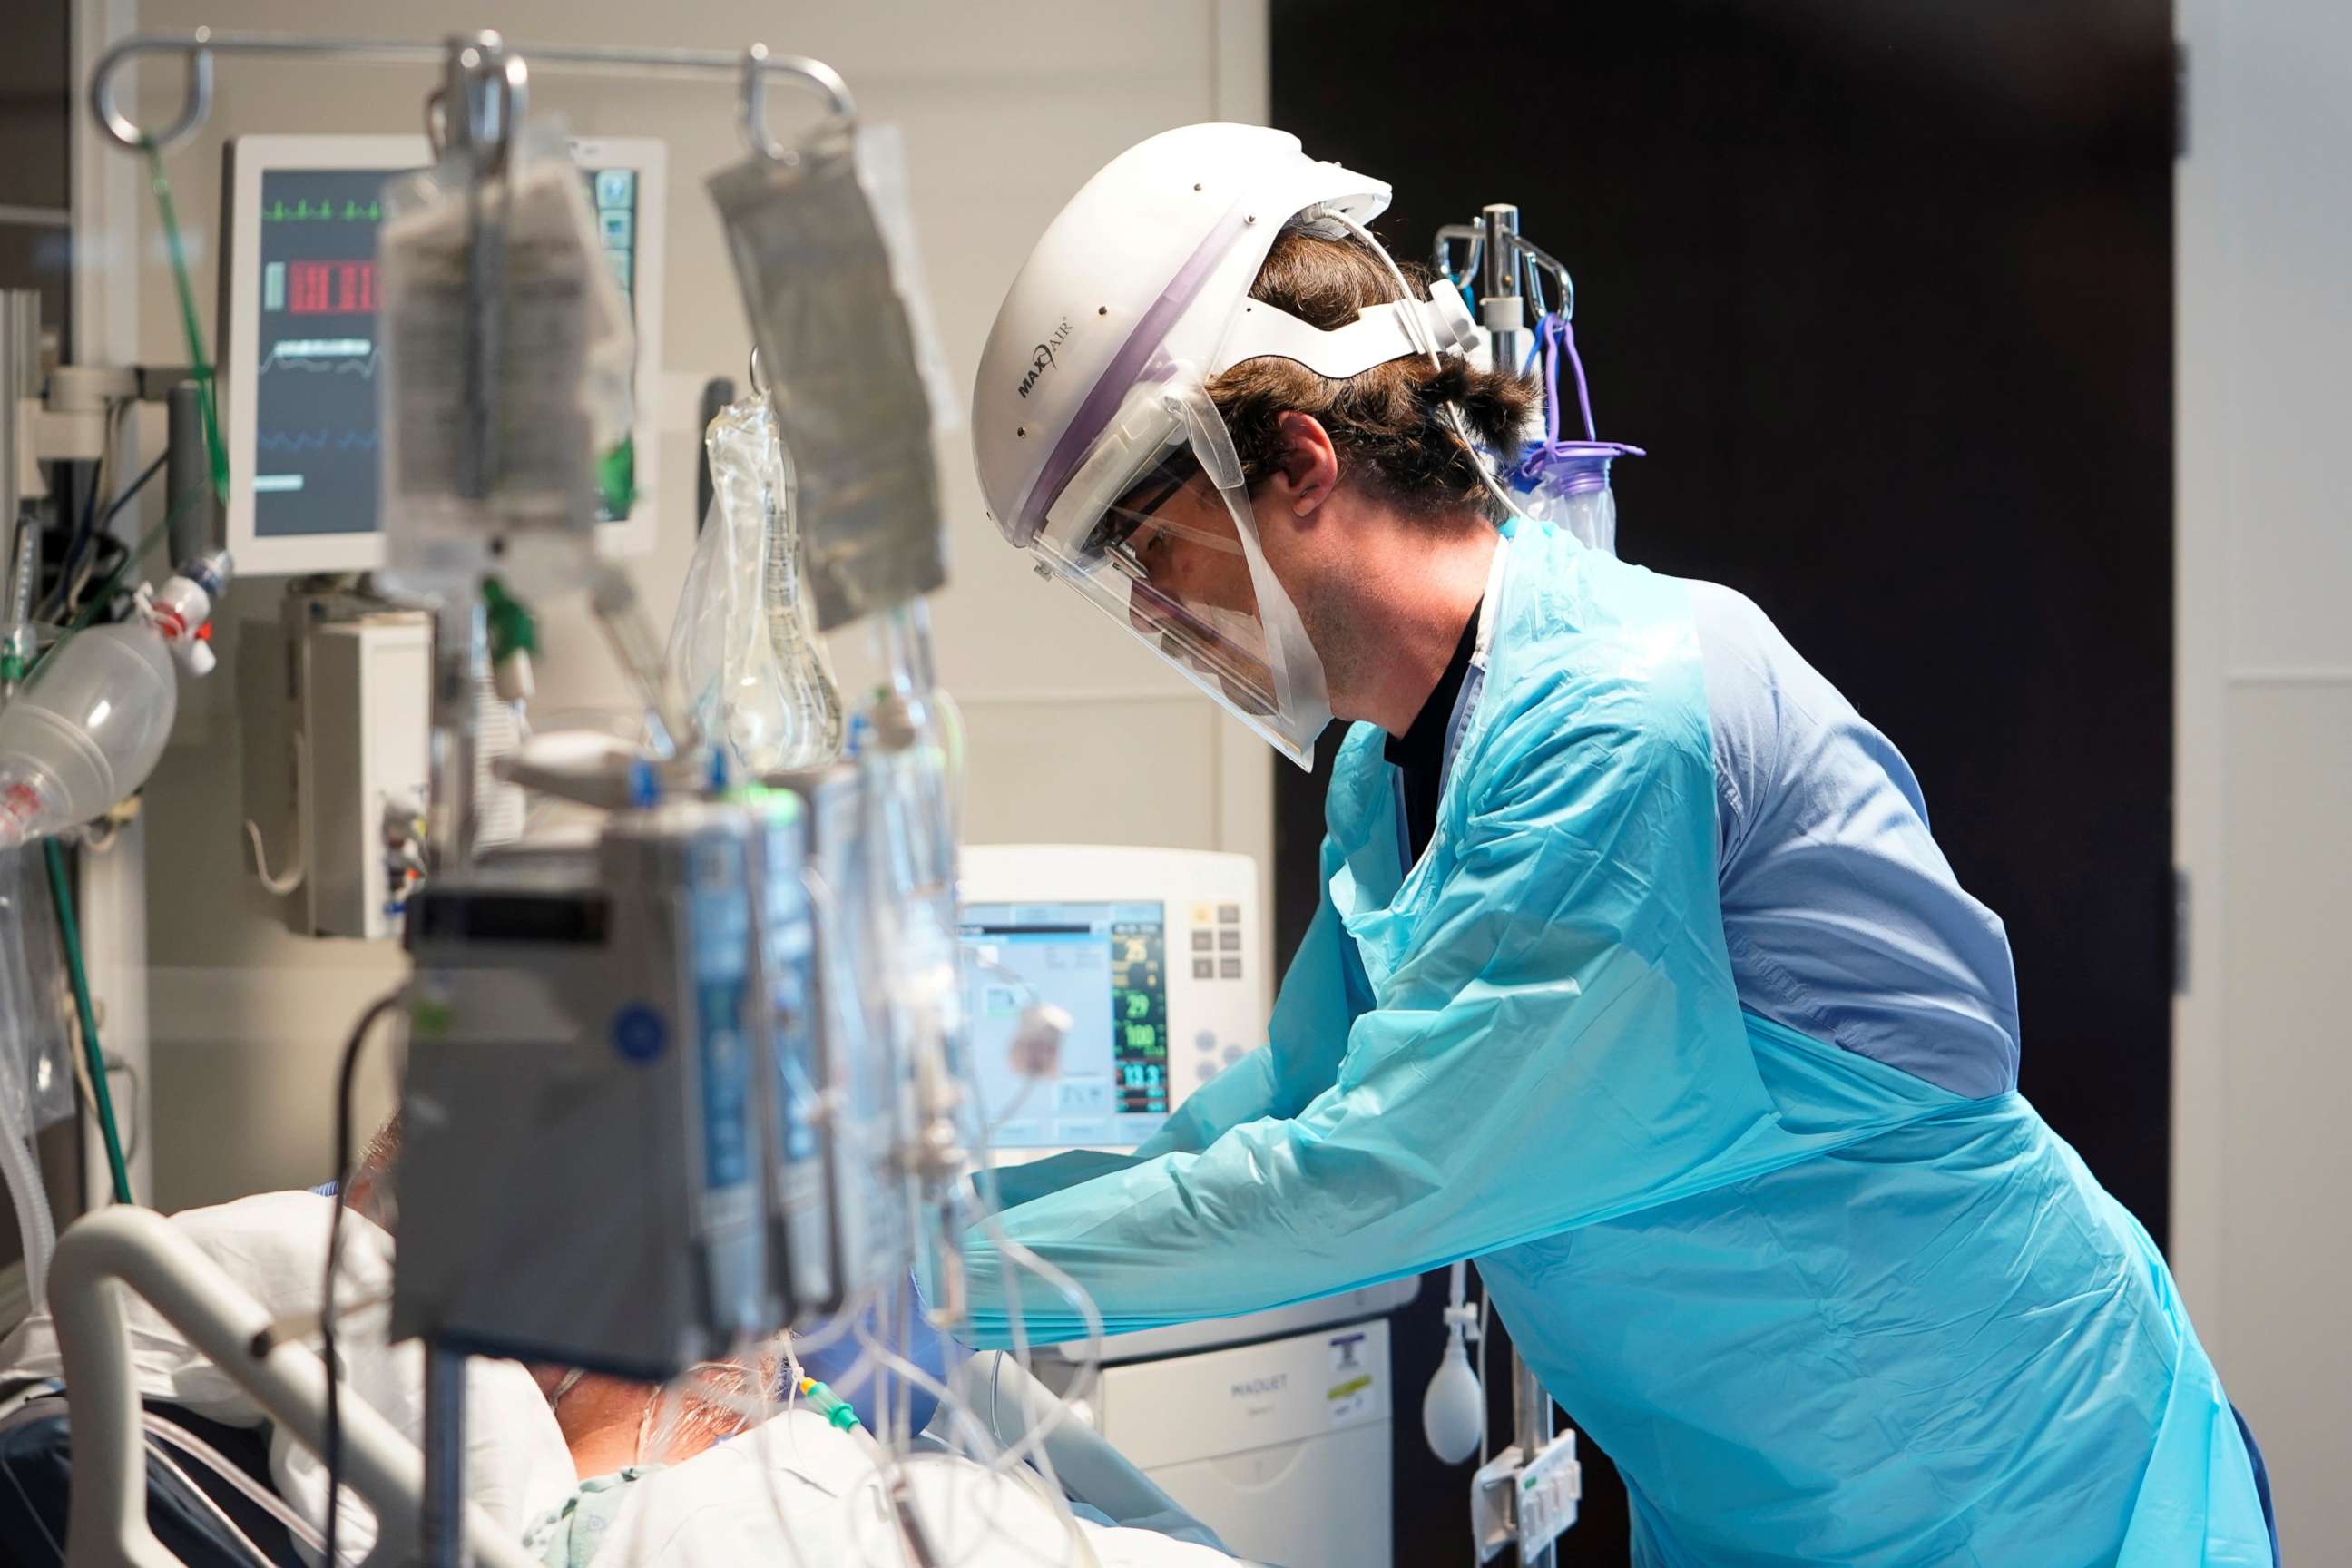 PHOTO: A nurse tends to a COVID-19 patient during a tour of SSM Health St. Anthony Hospital's intensive care unit amid the coronavirus pandemic in Oklahoma City, Aug. 24, 2021.